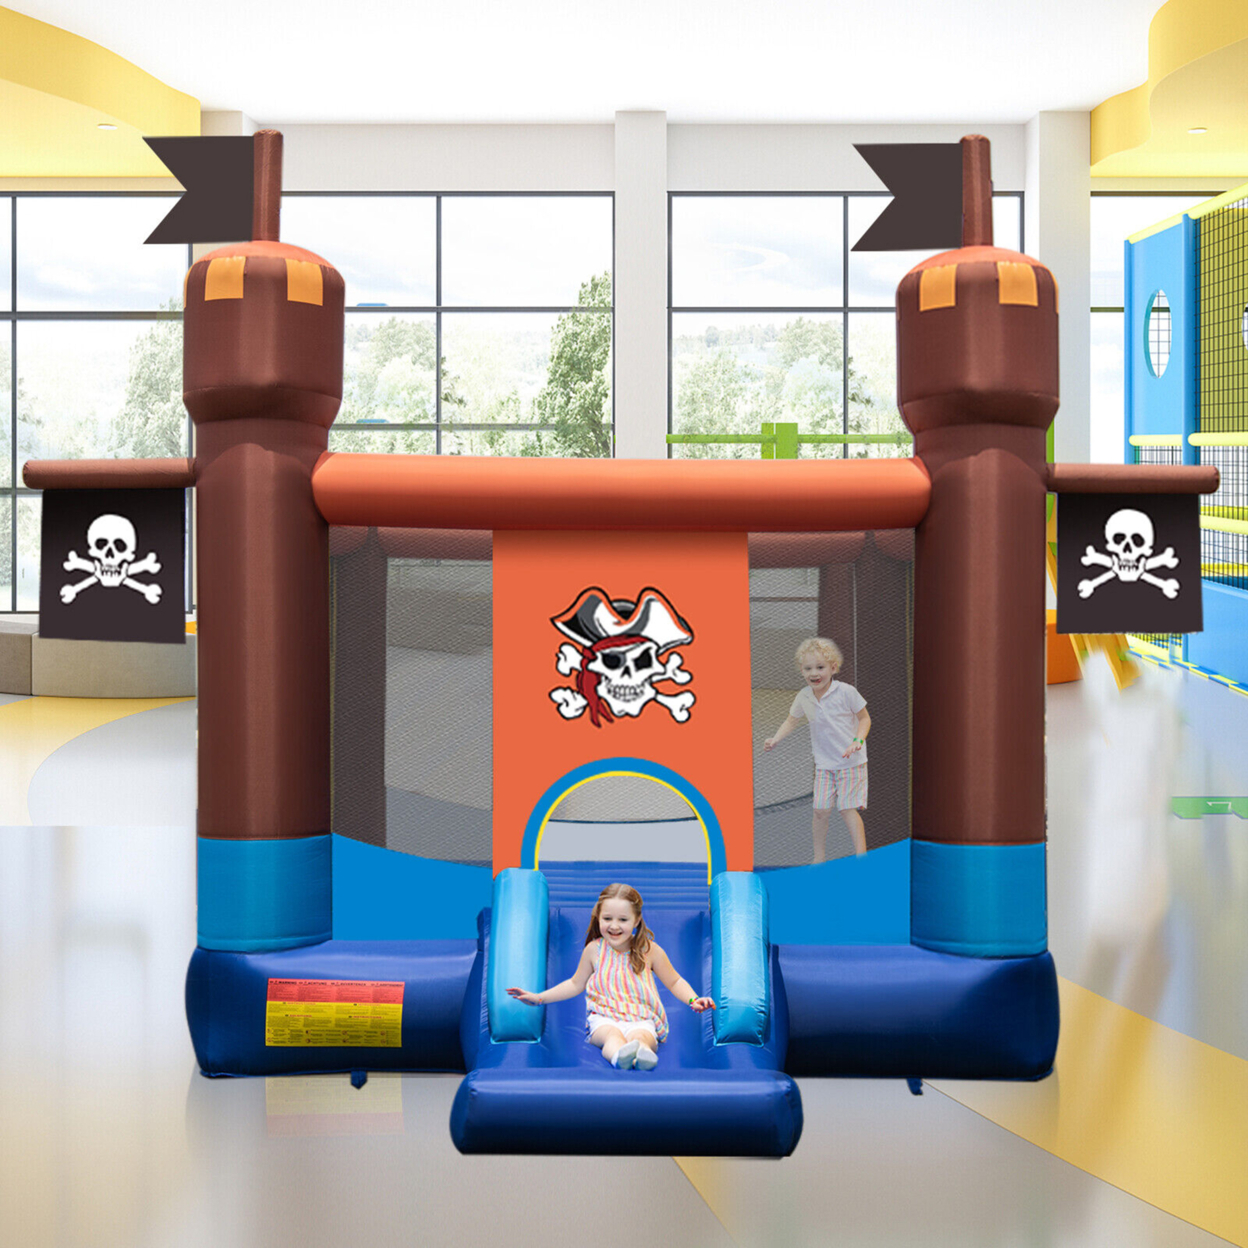 Pirate Themed Inflatable Bounce Castle With Large Jumping Area & 735W Blower